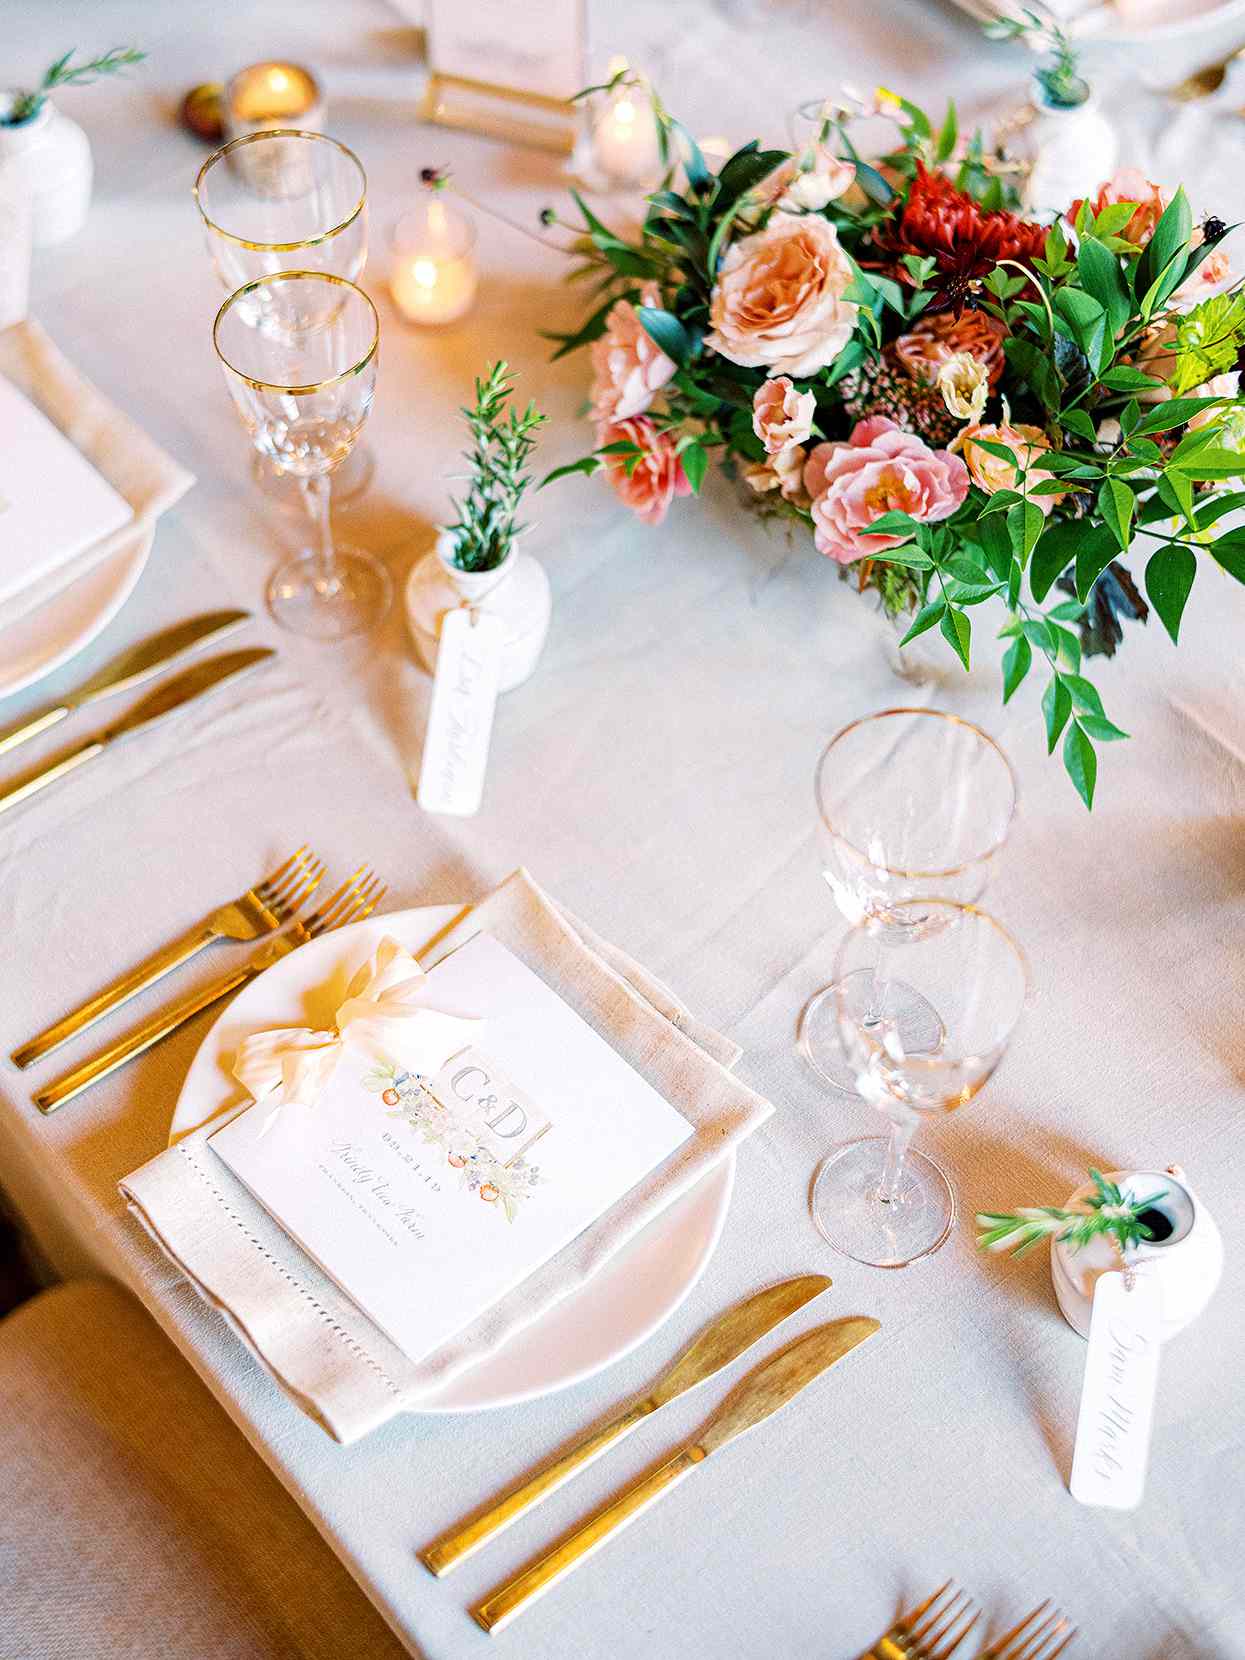 Claire and Dan's wedding reception place setting with gold cutlery